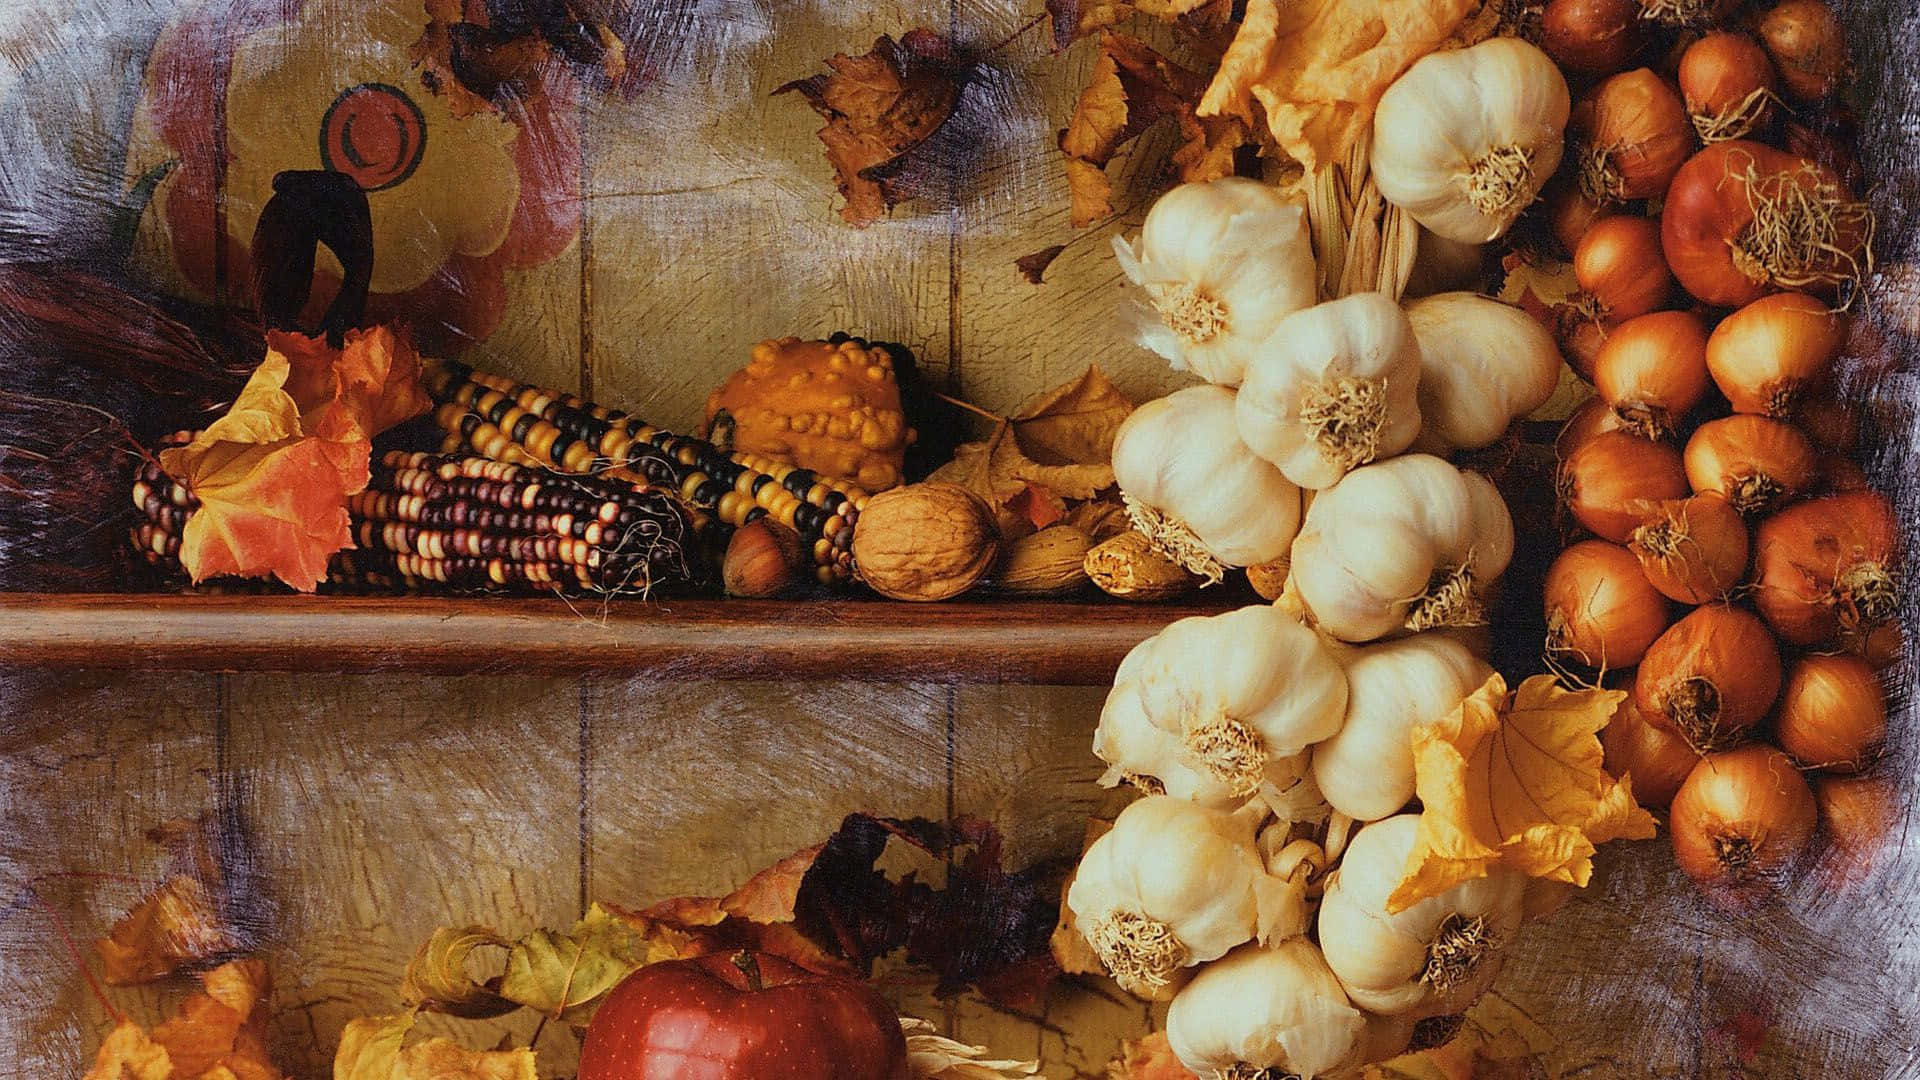 Colorful autumn harvest on a rustic wooden table Wallpaper